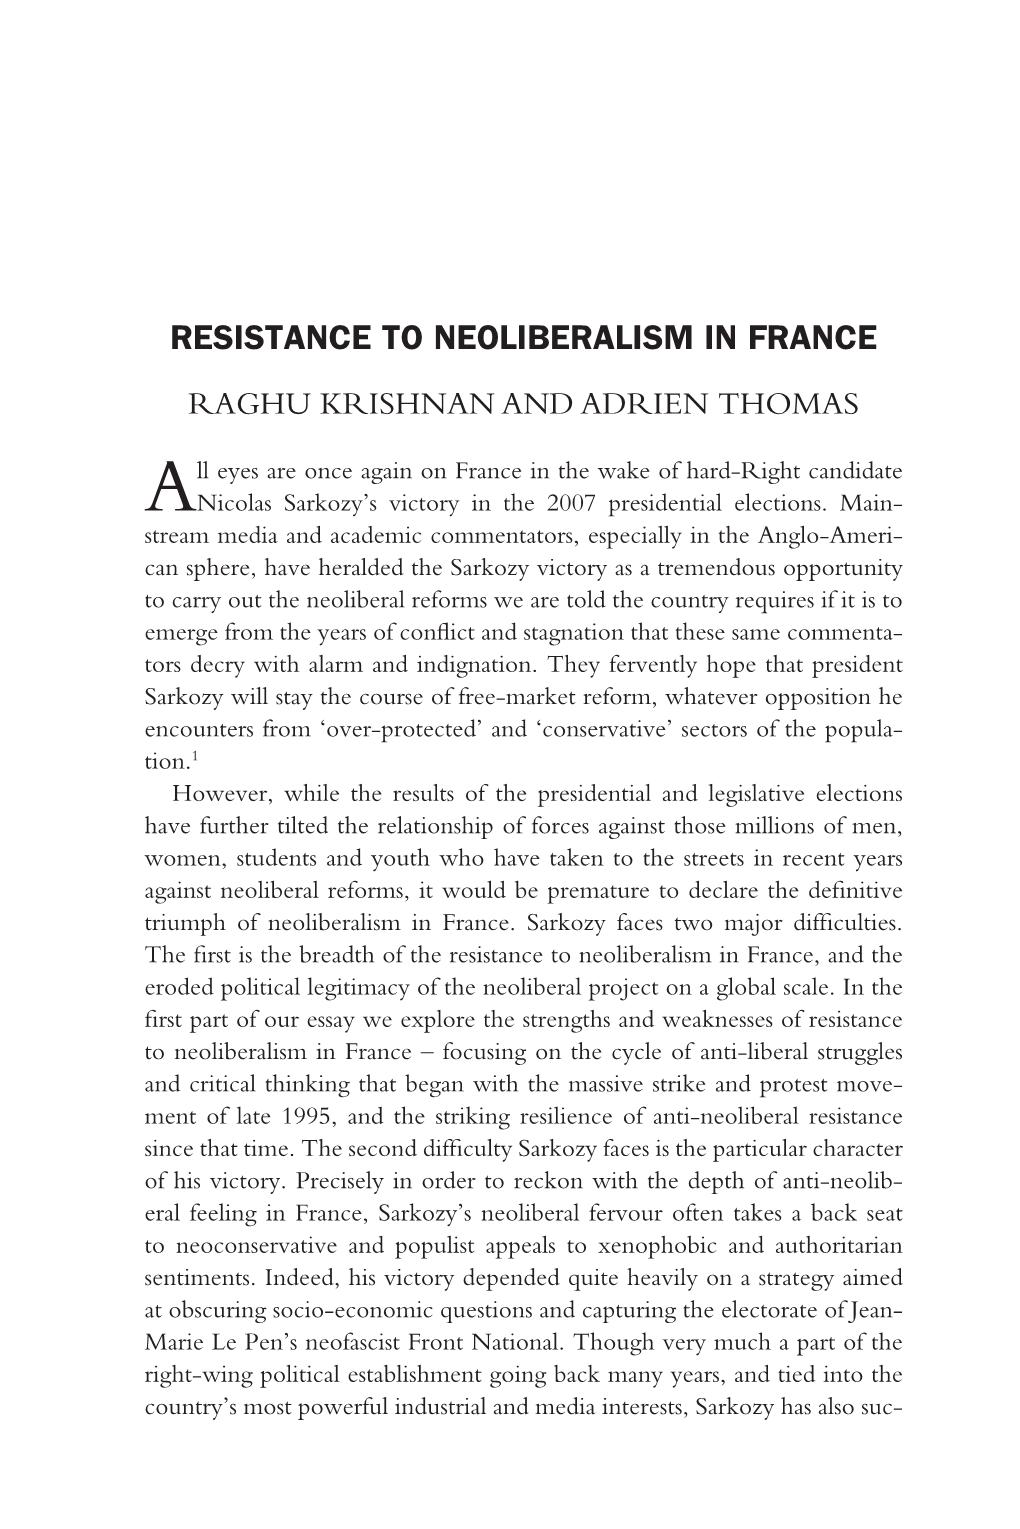 Resistance to Neoliberalism in France